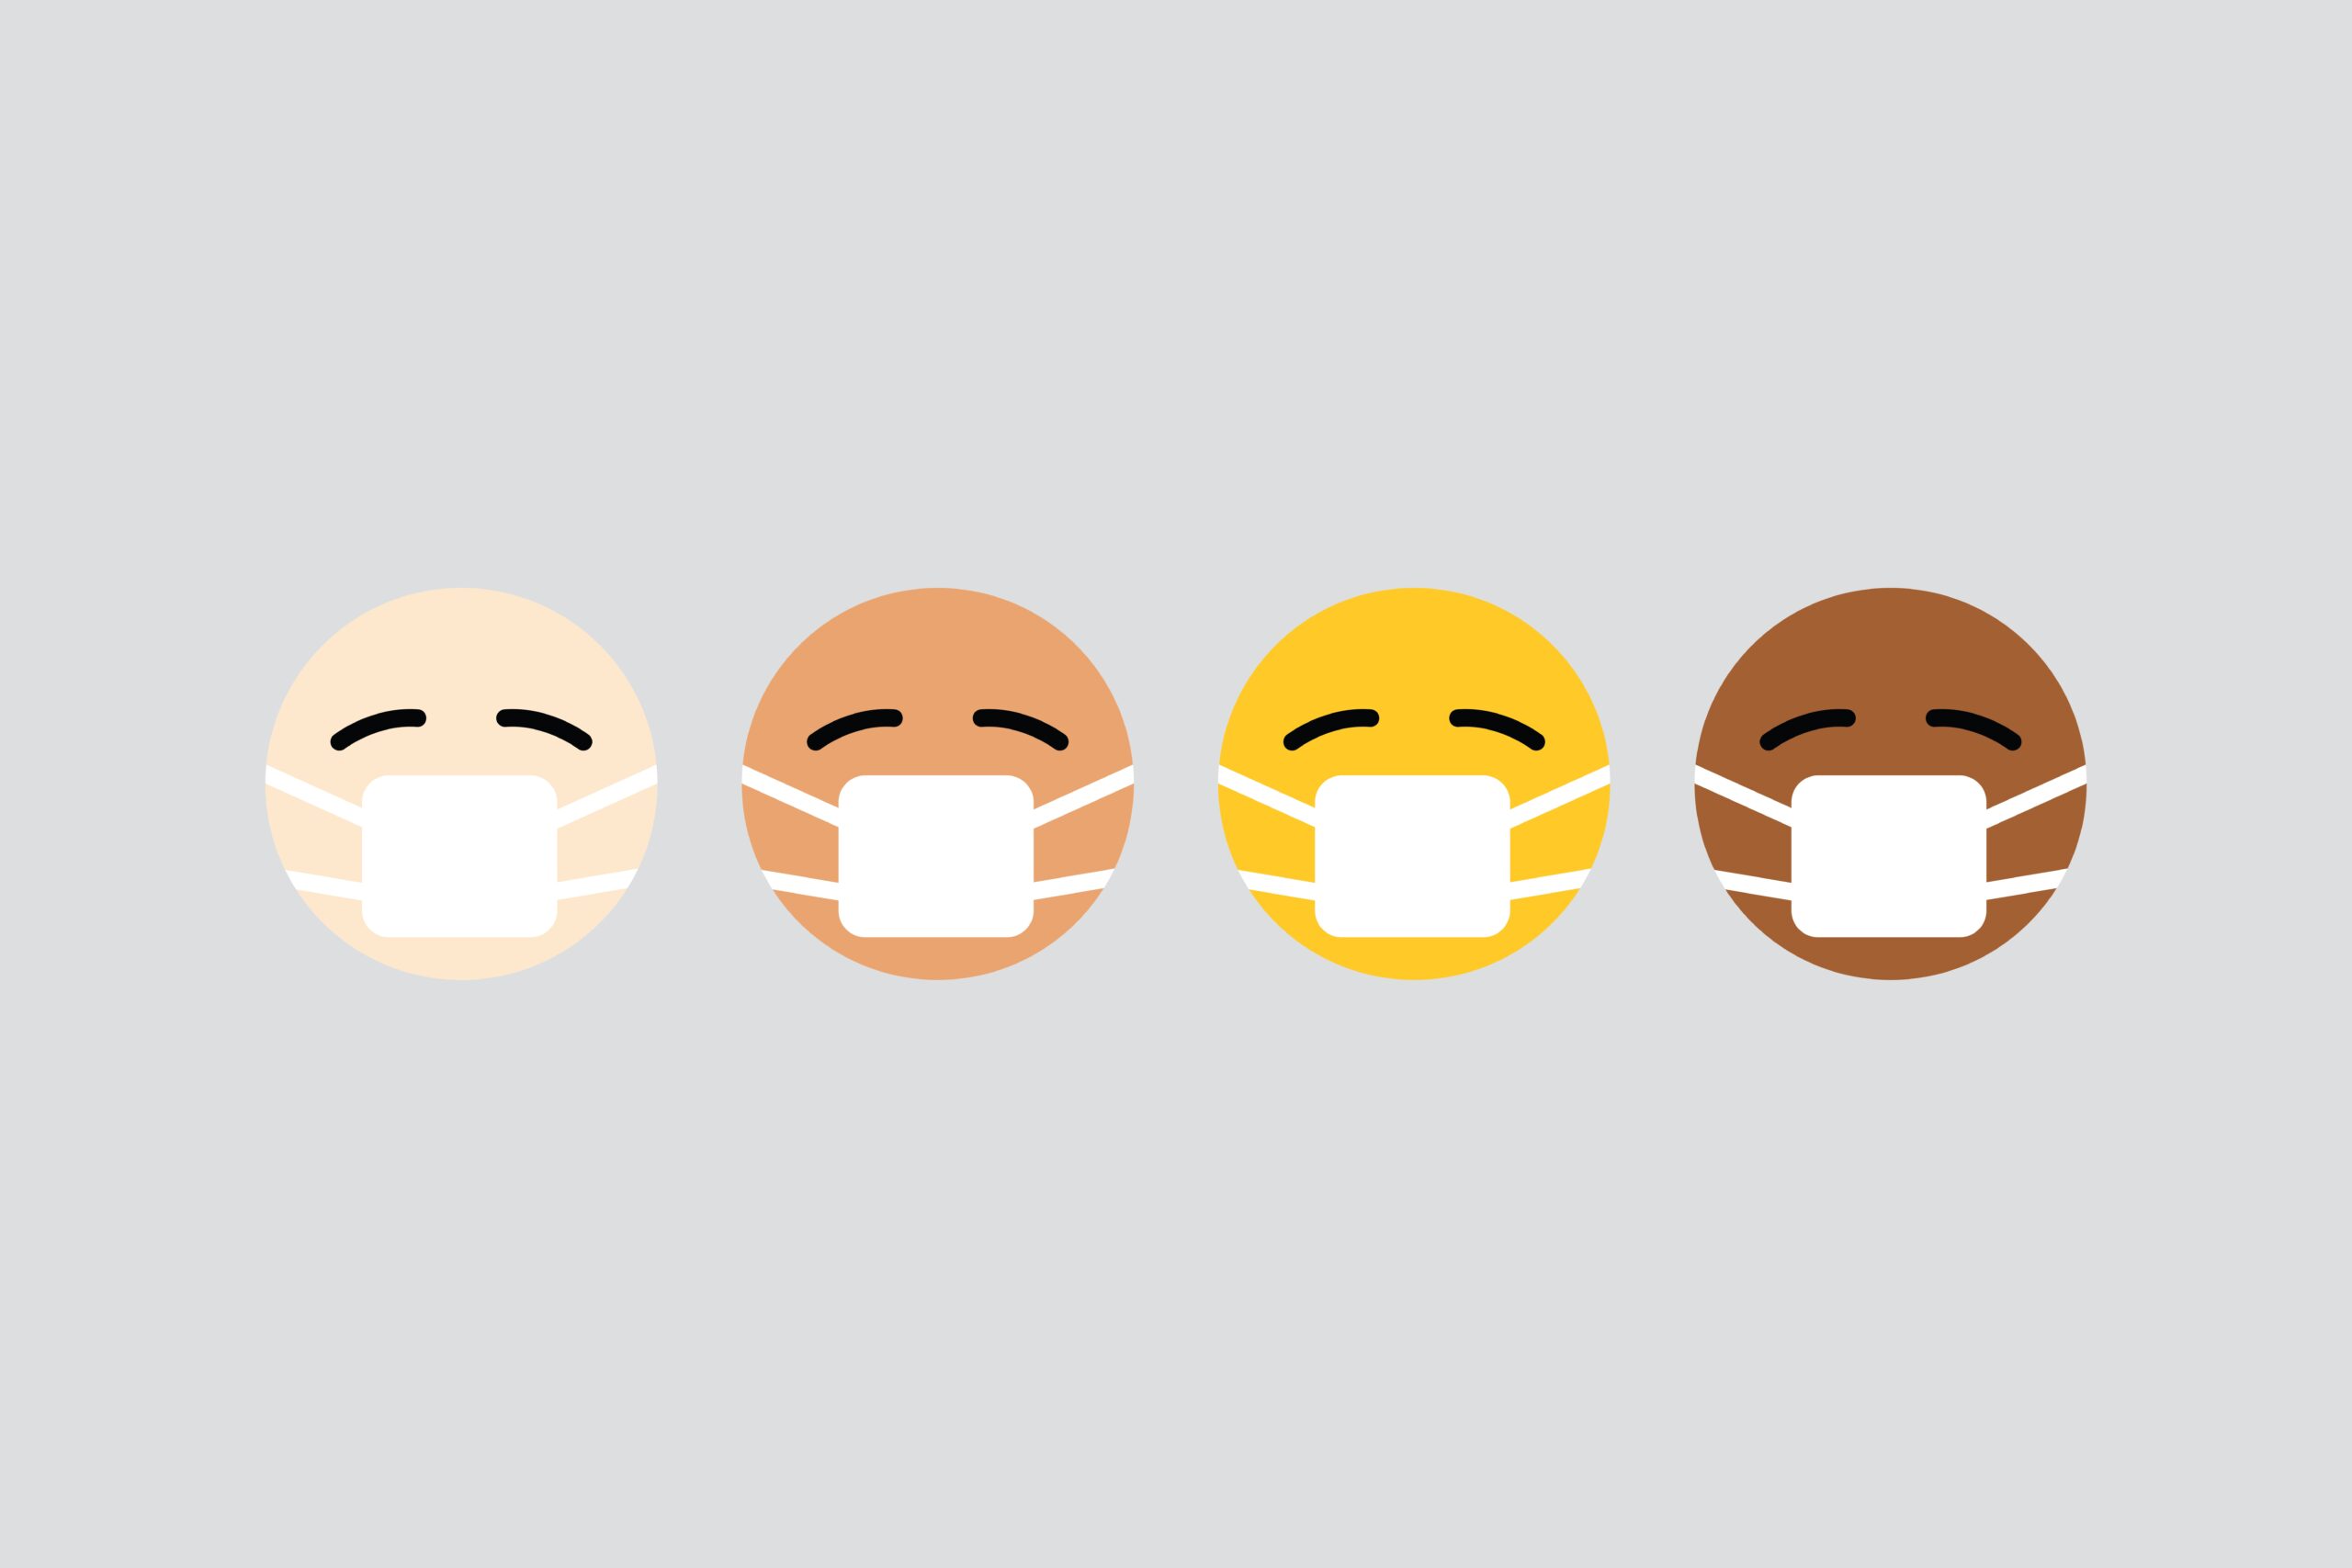 Image Of Four Emojis With Masks On. Each Emoji Is A Different Skin Color